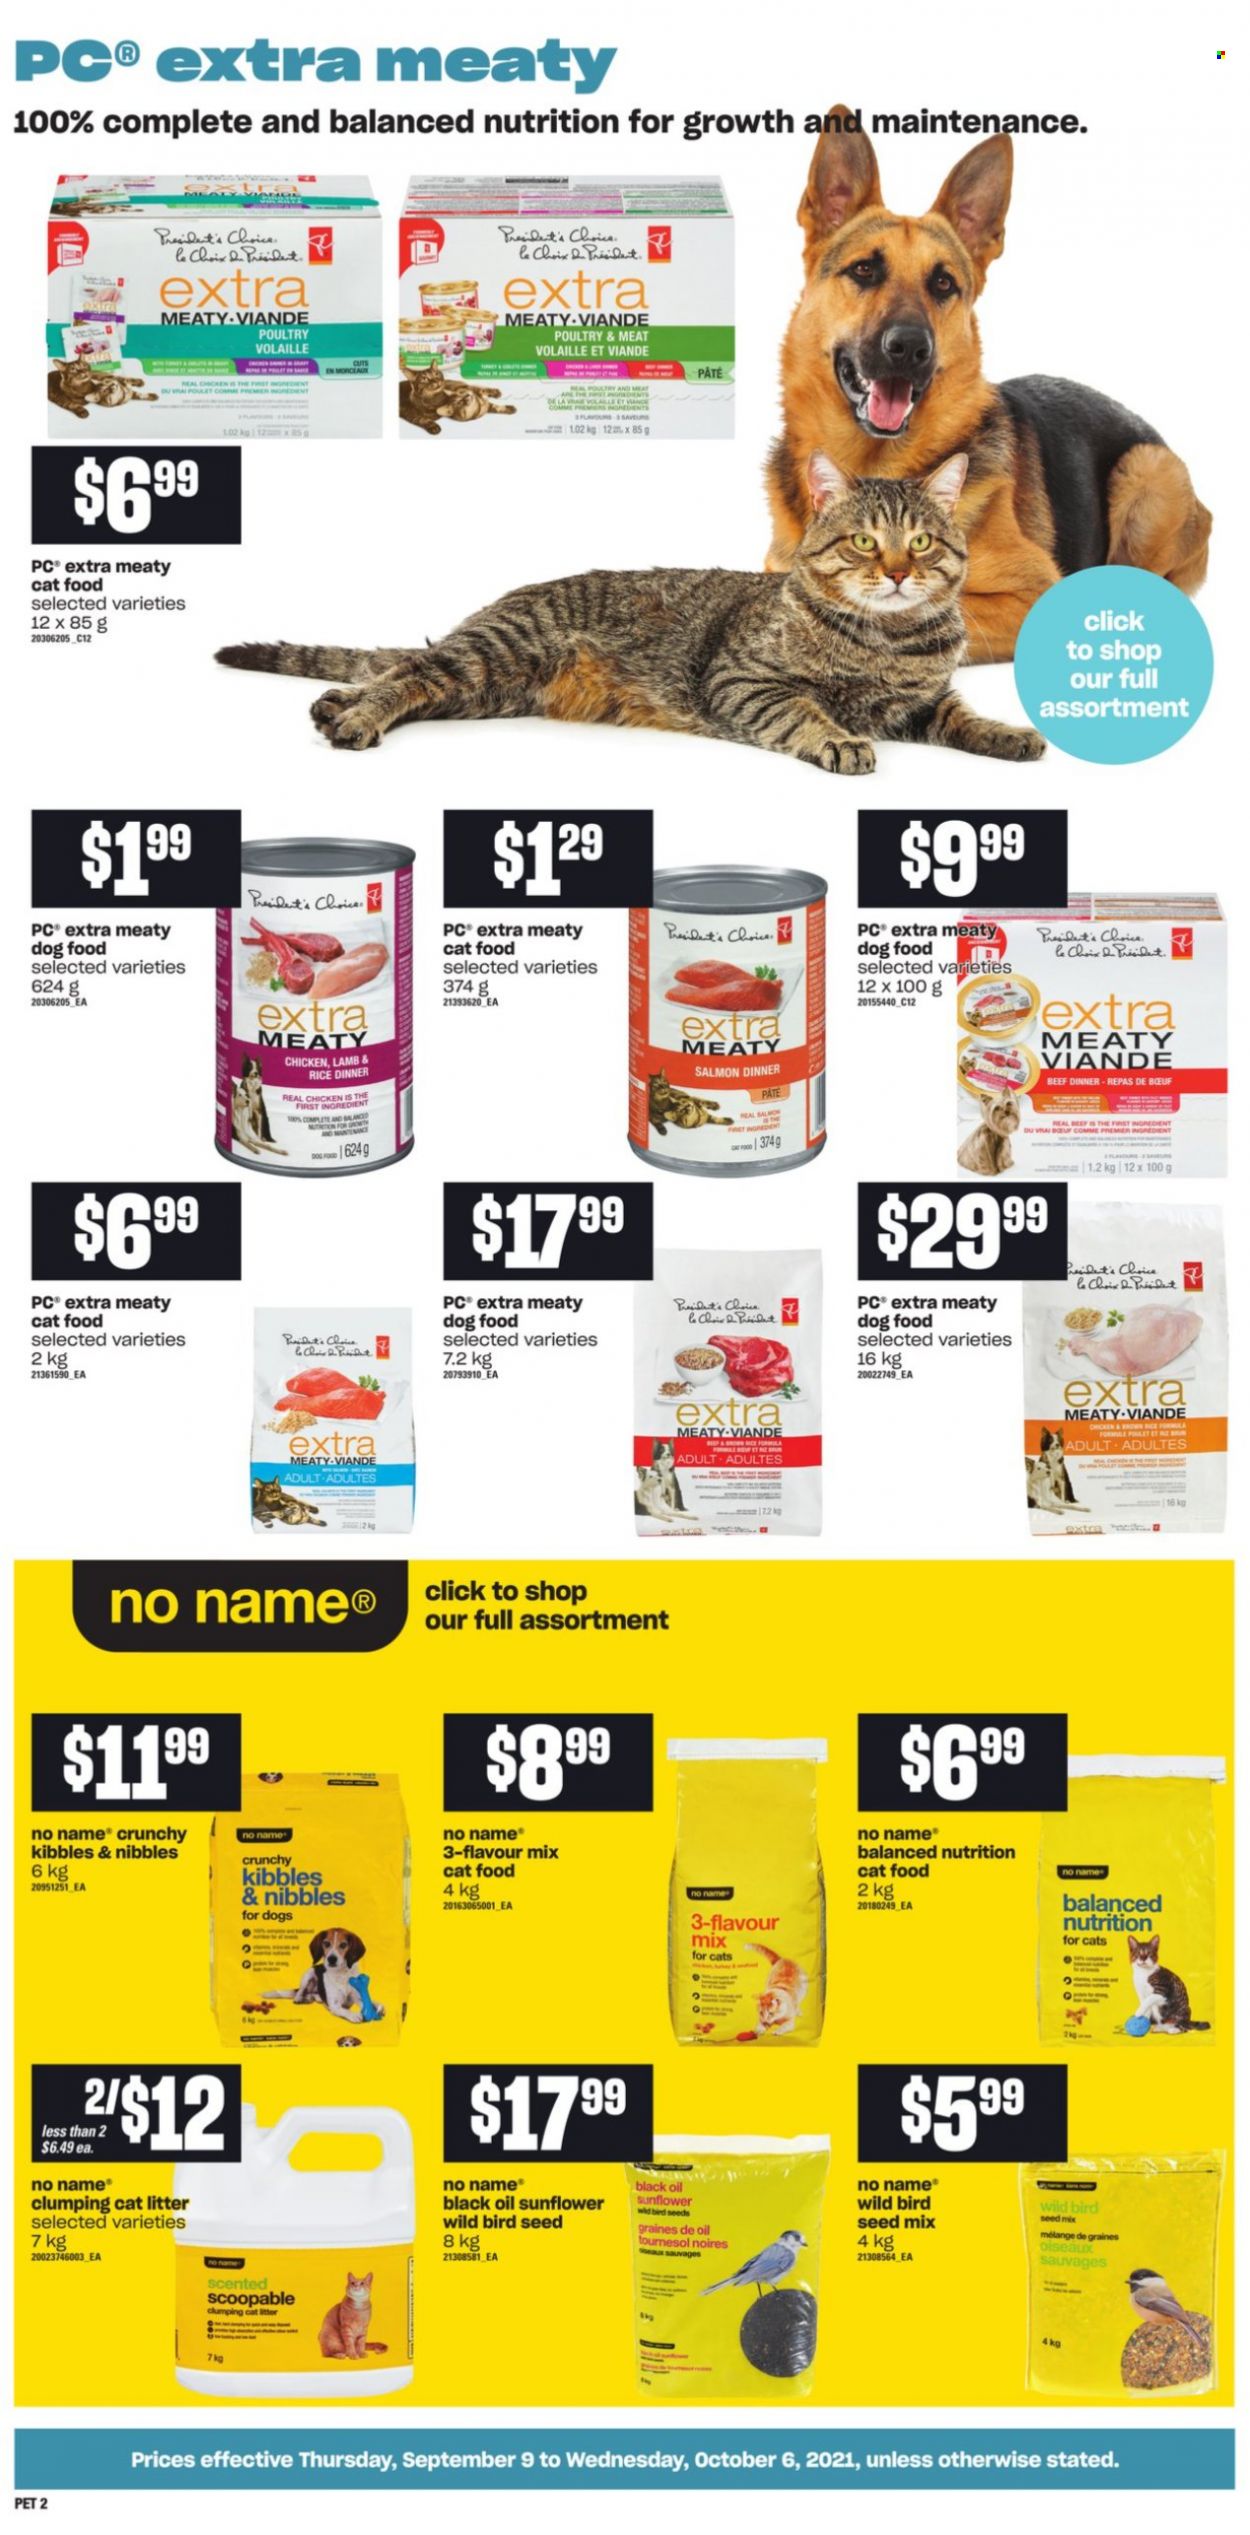 thumbnail - Atlantic Superstore Flyer - September 09, 2021 - October 06, 2021 - Sales products - No Name, rice, oil, cat litter, animal food, bird food, cat food, dog food, plant seeds, sunflower. Page 2.